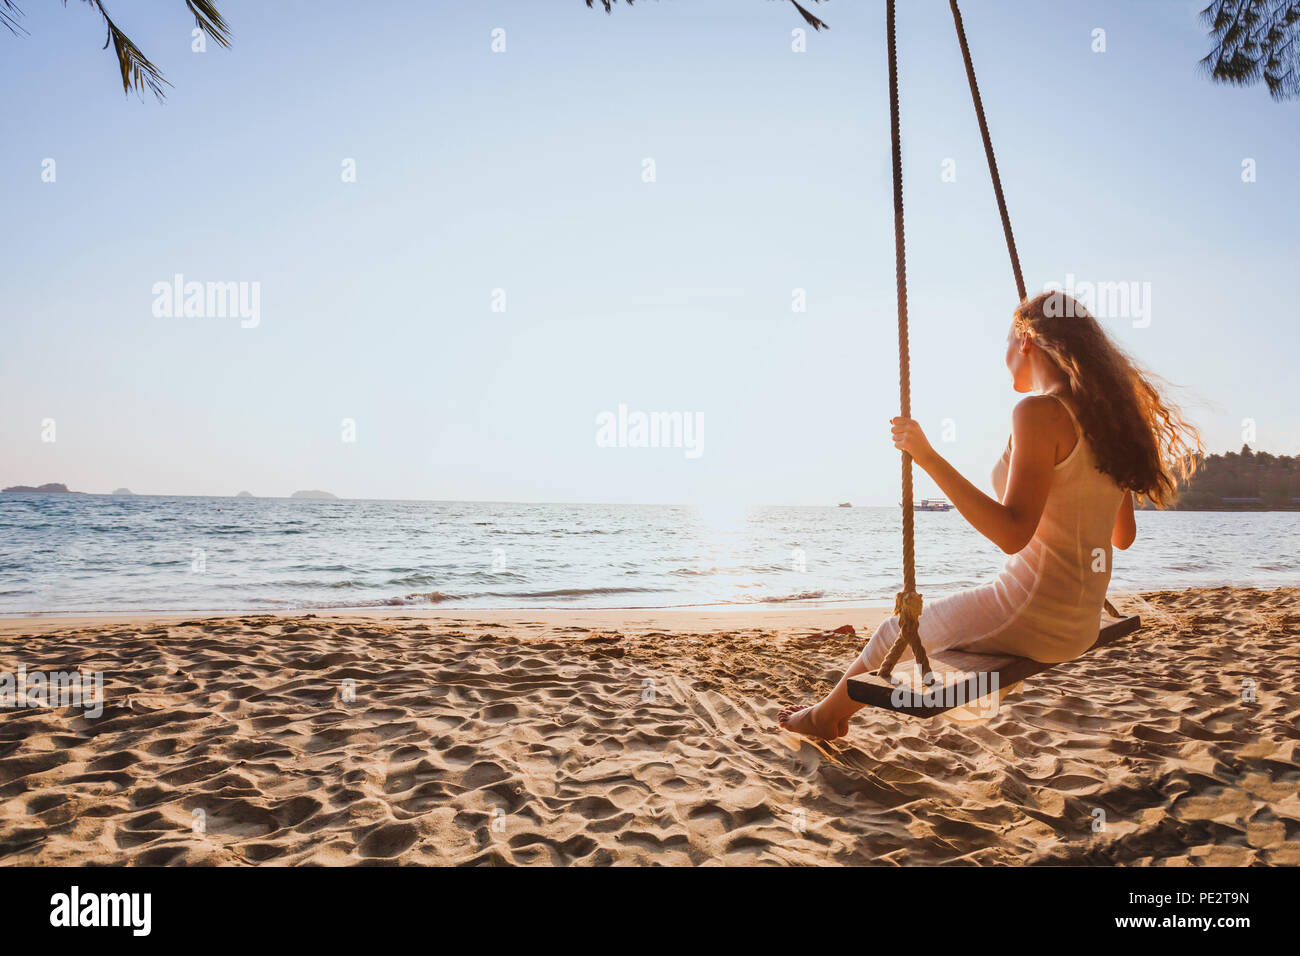 dream and happiness concept, romantic beautiful carefree woman relaxing on the swing at sunset beach, summer holidays, vacation travel and relaxation, Stock Photo